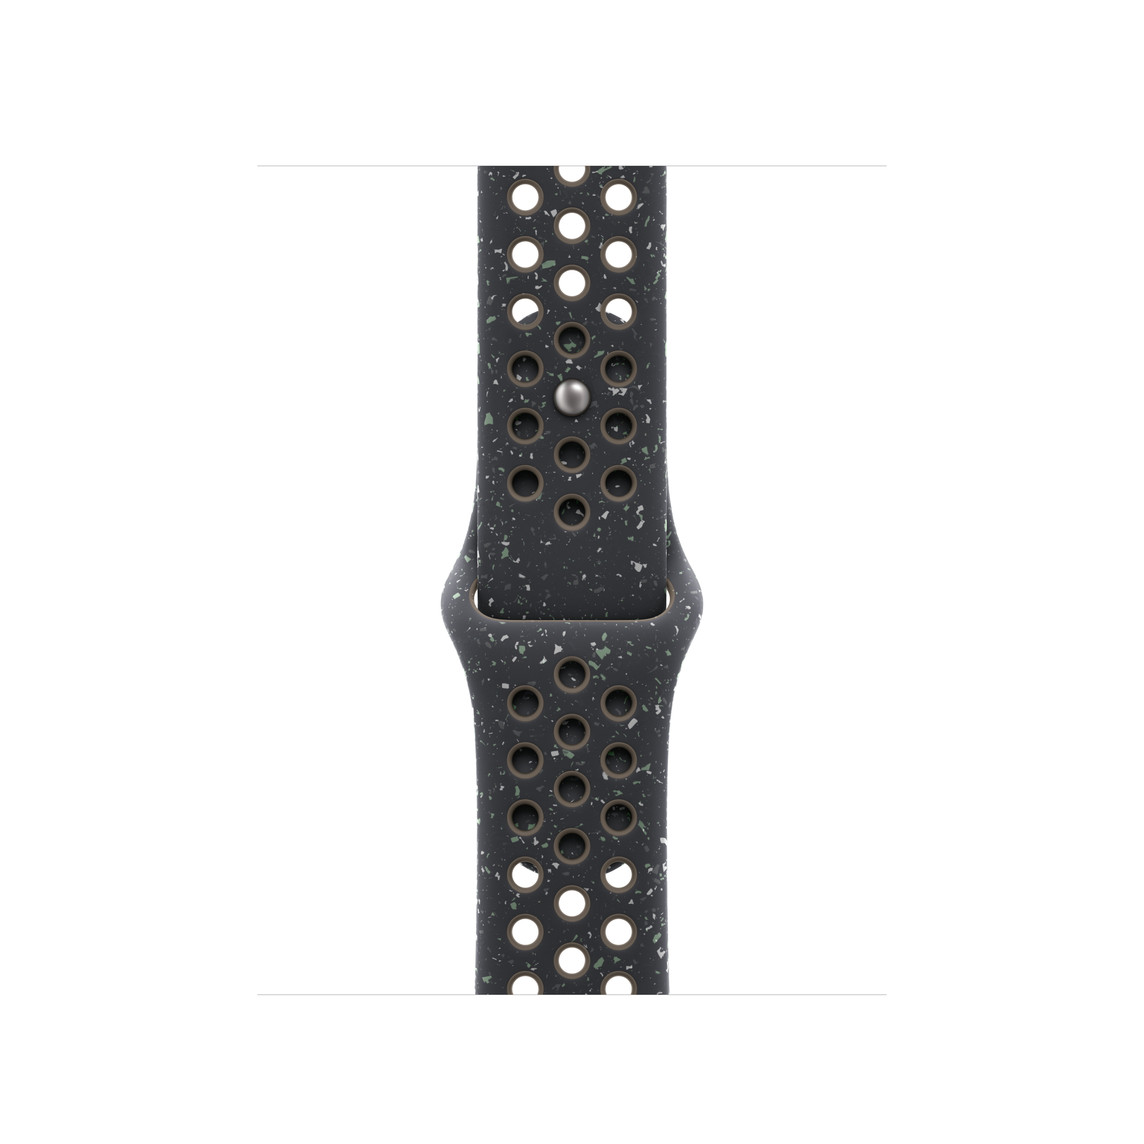 Midnight Sky (black) Nike Sport Band, smooth fluoroelastomer with perforations for breathability and pin-and-tuck closure